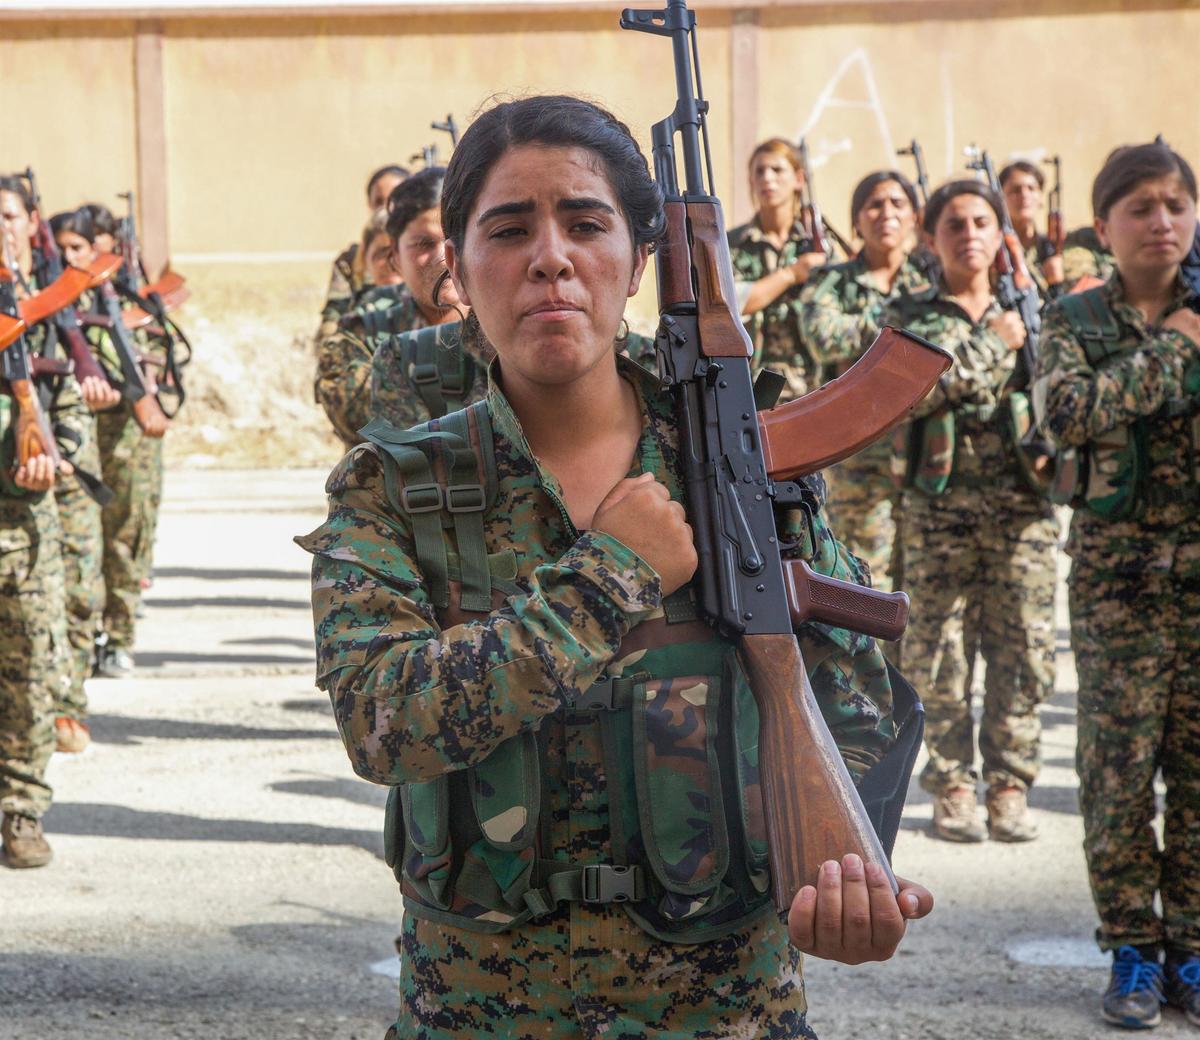 Syrian Democratic Forces trainees, representing an equal amount of Arab and Kurdish volunteers, stand in formation at their graduation ceremony in northern Syria, Aug. 9, 2017. (Army photo by Sgt. Mitchell Ryan)